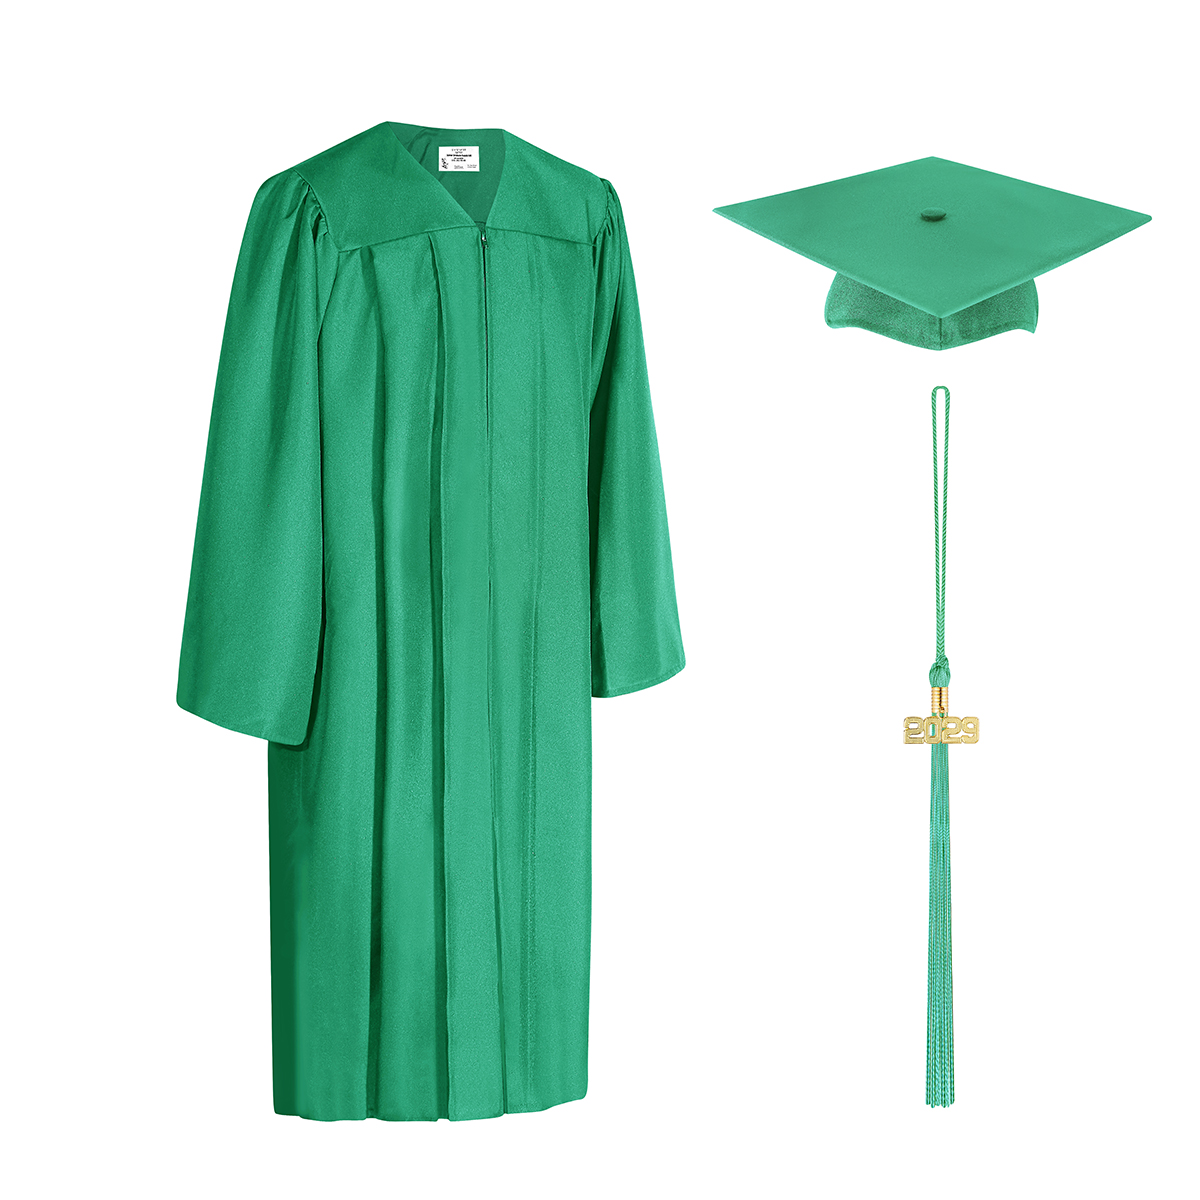 Satin Orange Shiny Faculty Graduation Gown and Cap at Rs 140/piece in Mumbai